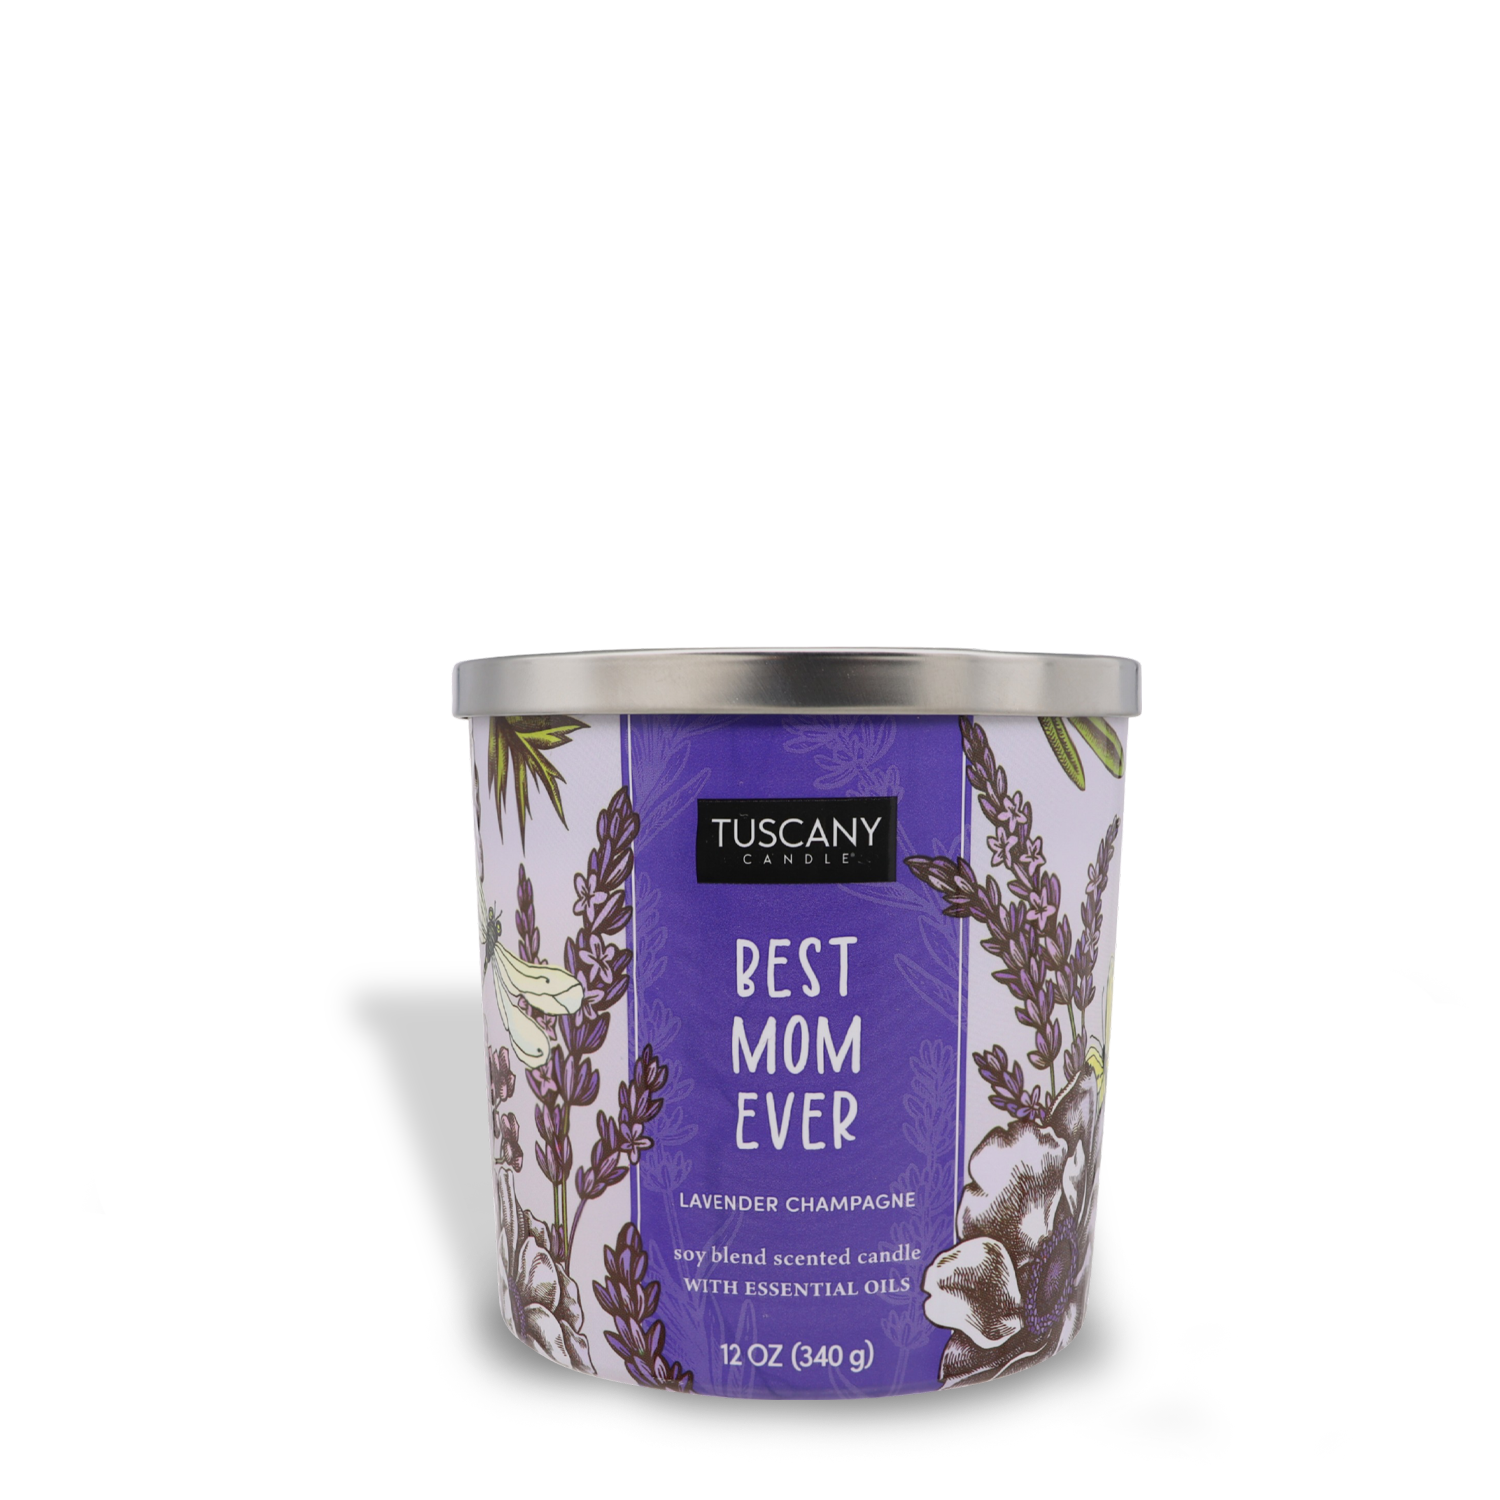 A Tuscany Candle® SEASONAL Best Mom Ever (12 oz) – Mother's Day Collection with a lavender champagne scent, displayed against a white background.